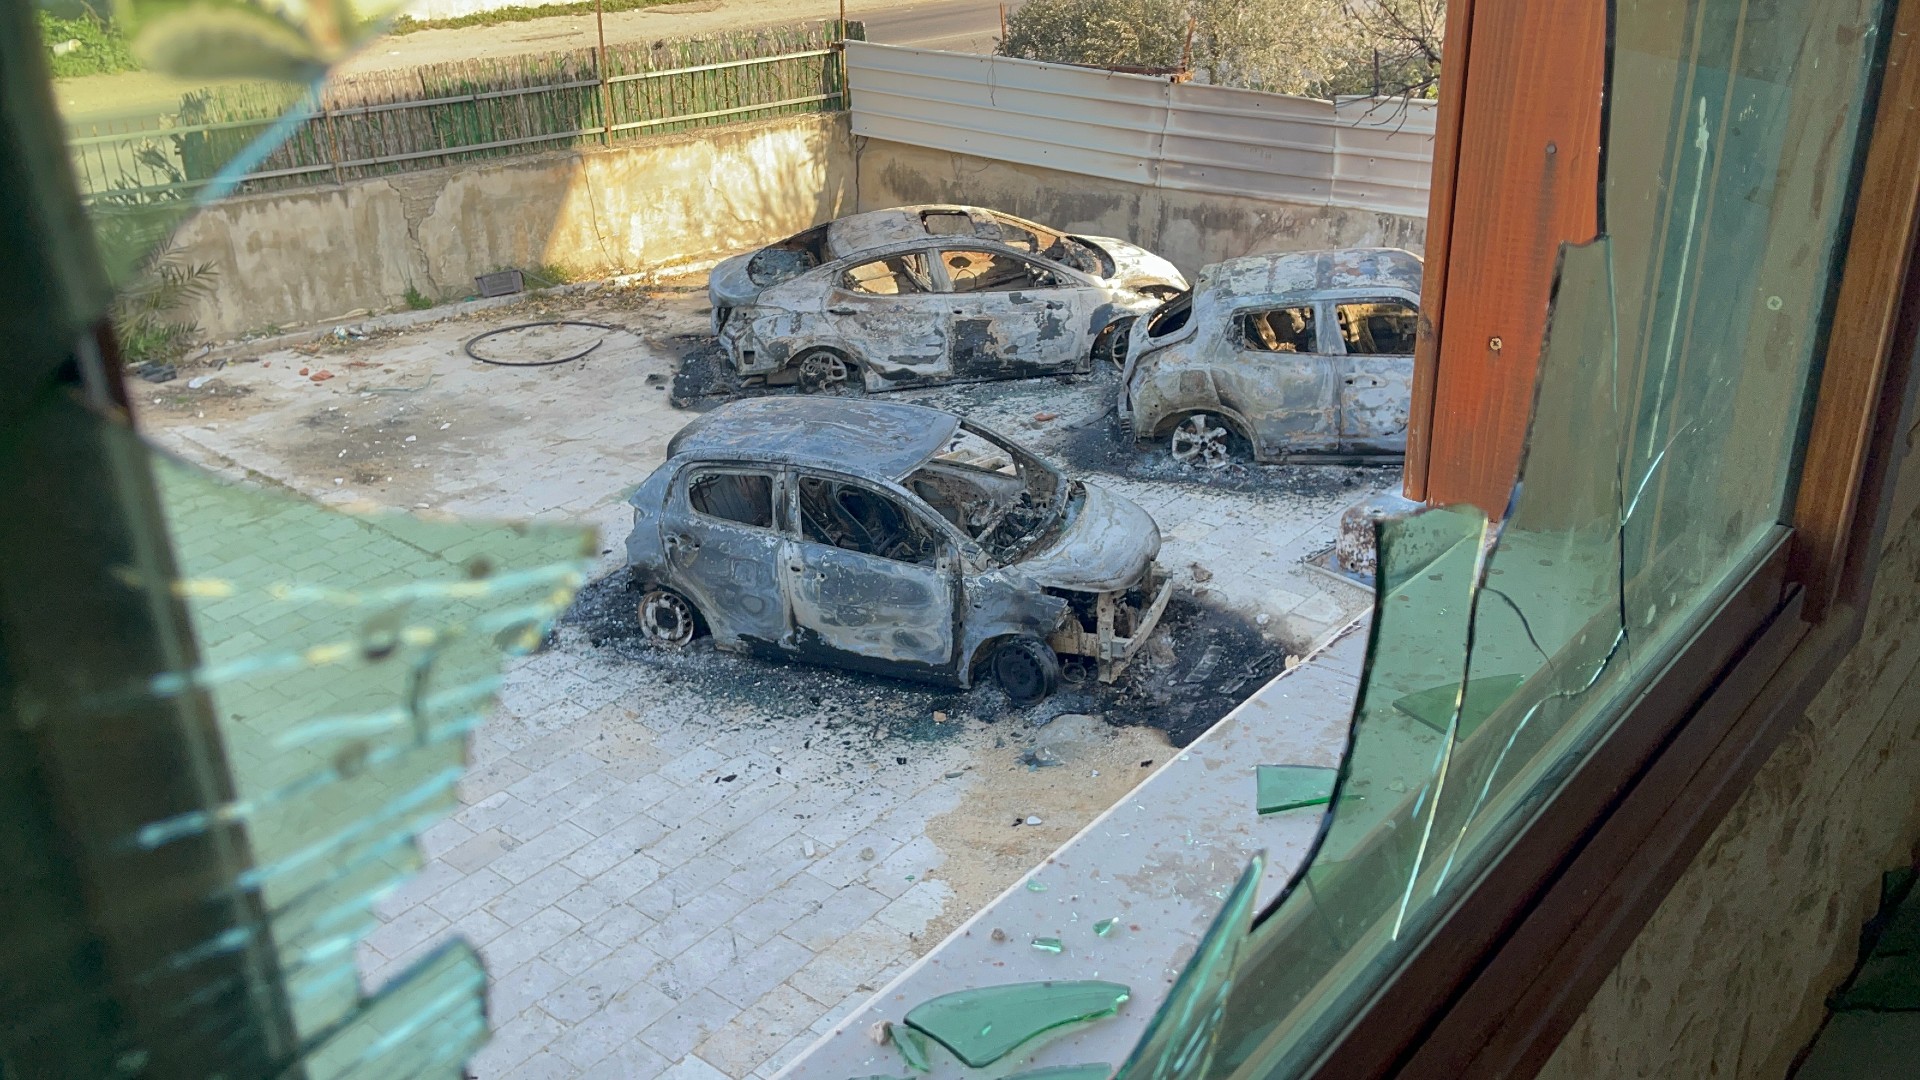 Cars burnt out by settlers are seen from a broken window in occupied West Bank town Huwwara on 27 February 2023. (Photos: MEE/Hisham Abu Shaqrah)